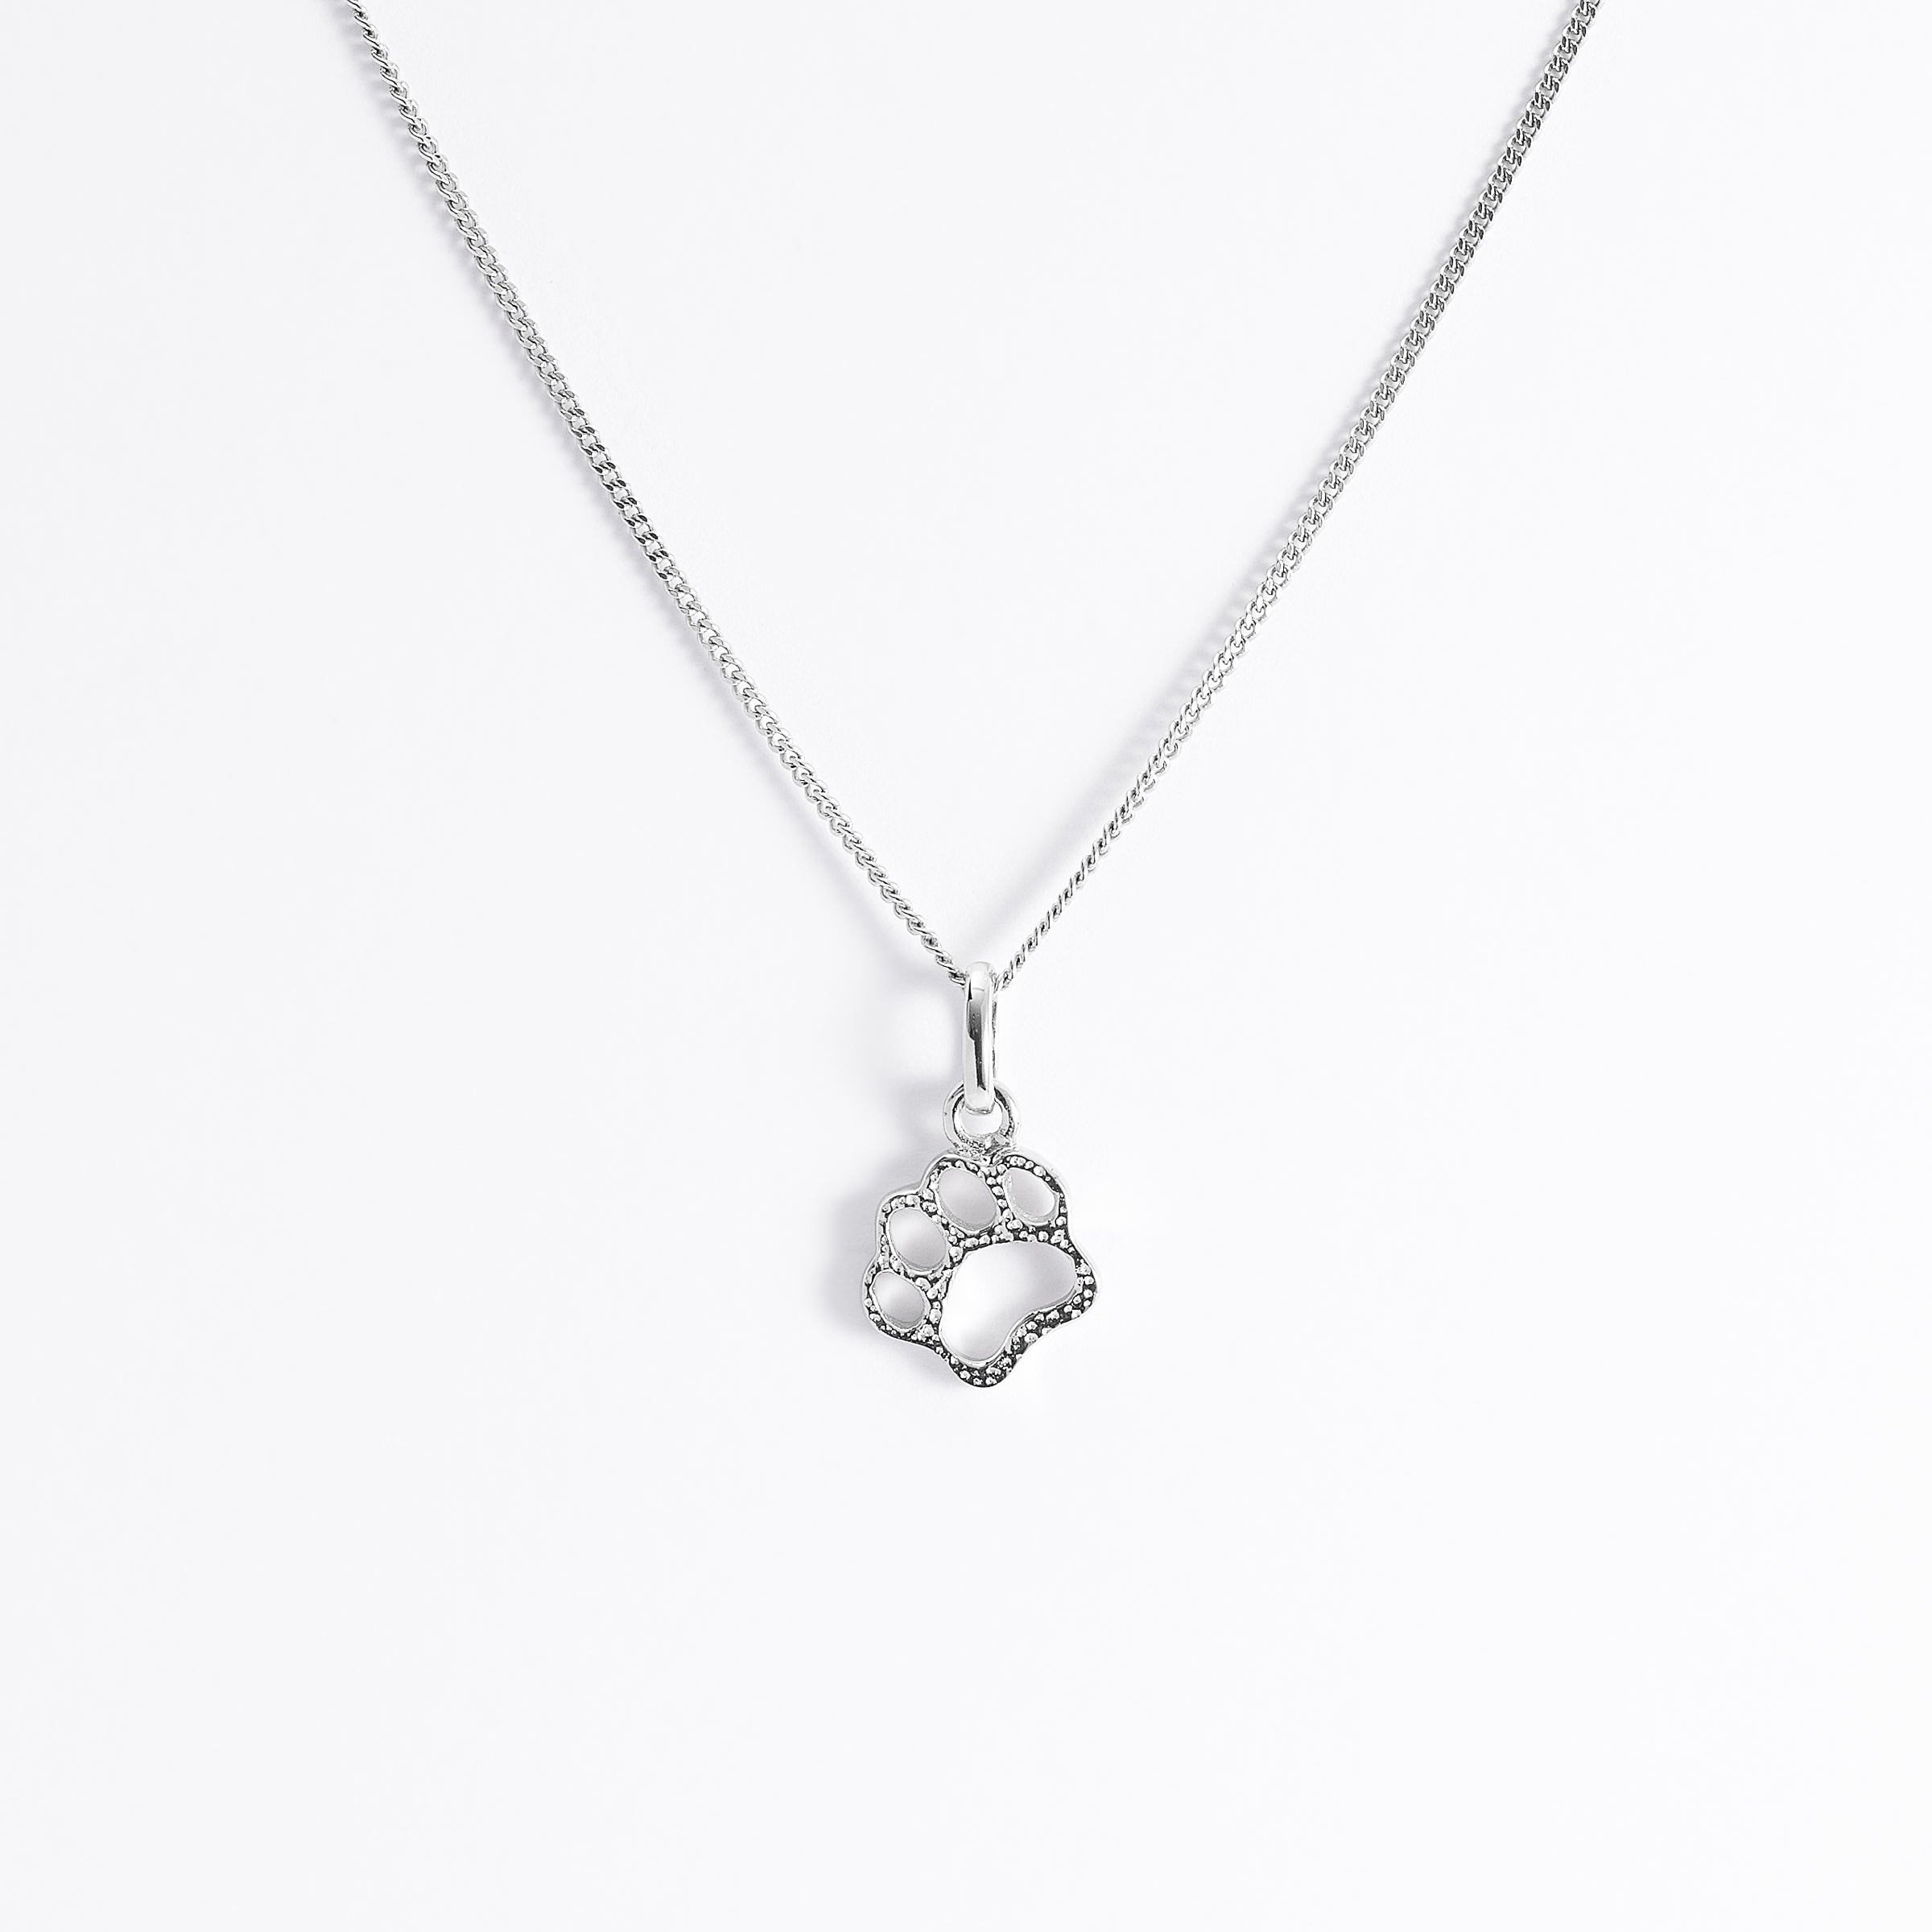 Paw Print Necklace Sterling Silver Paw Print Necklace Tiny Pawprint Necklace  Cat Dog Lovers Jewelry Pet Memorial Necklace Pet Jewelry - Etsy | Paw  necklaces, Paw print necklace, Paw pendants